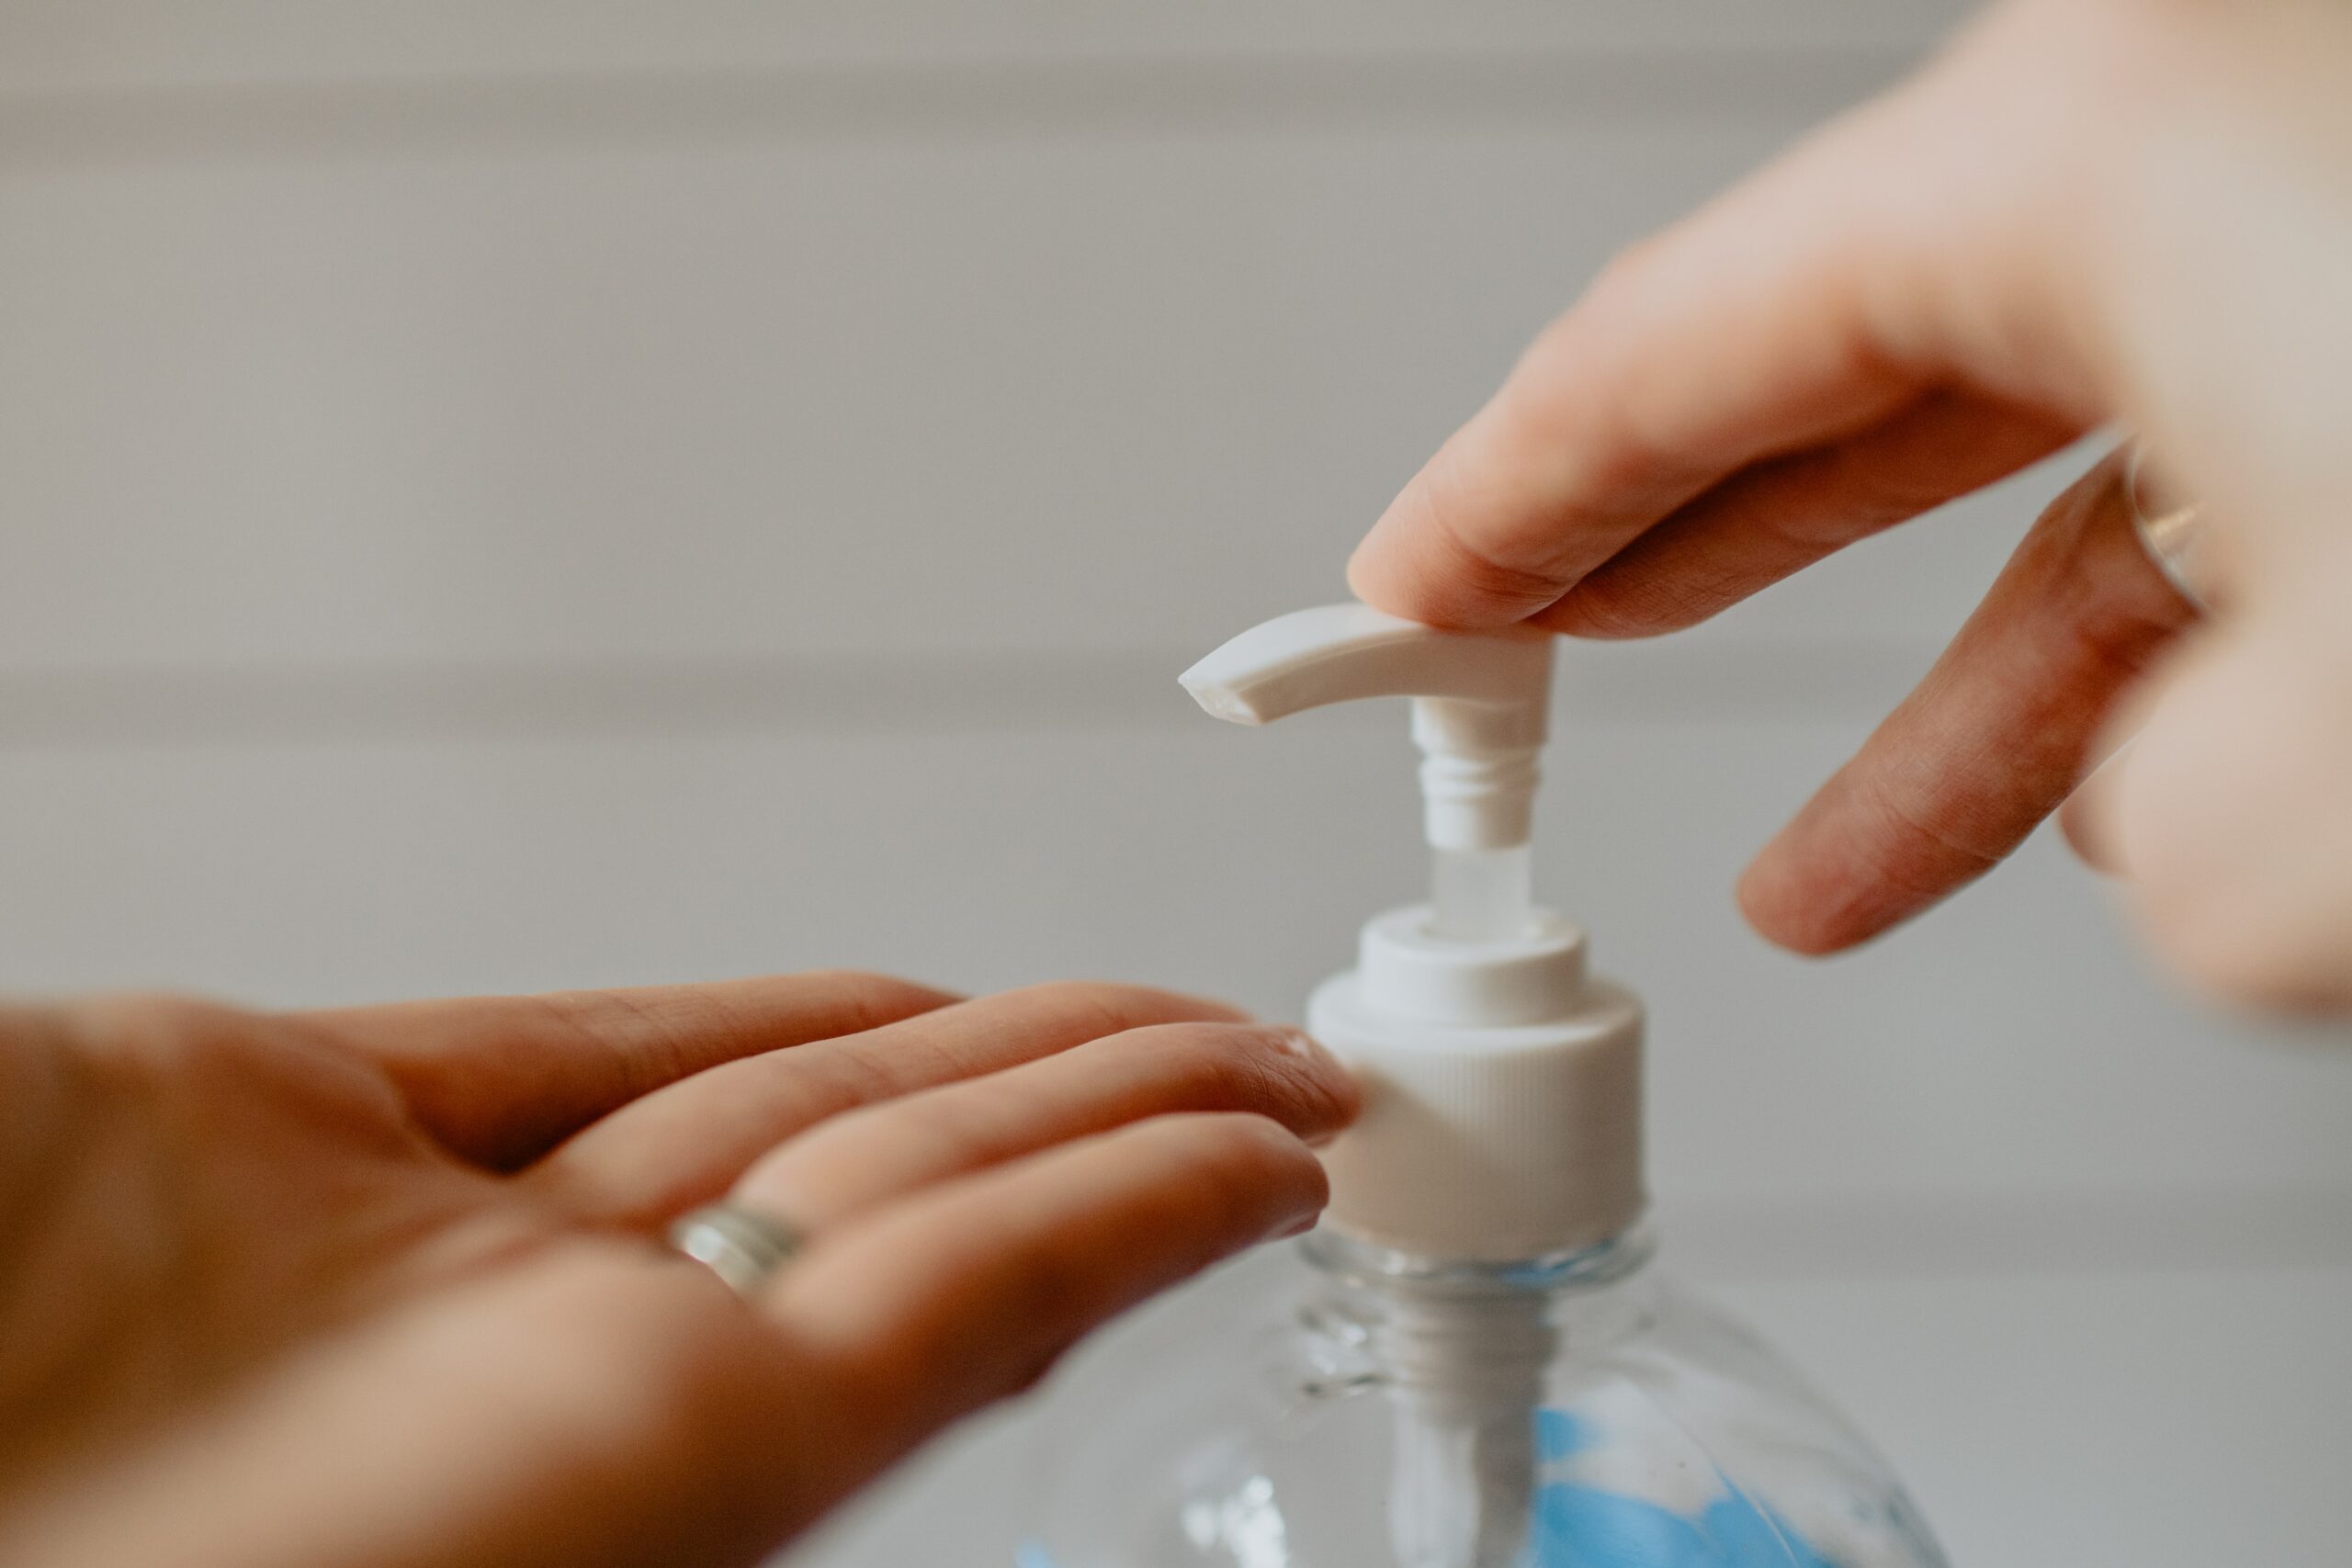 How to make hand sanitizer